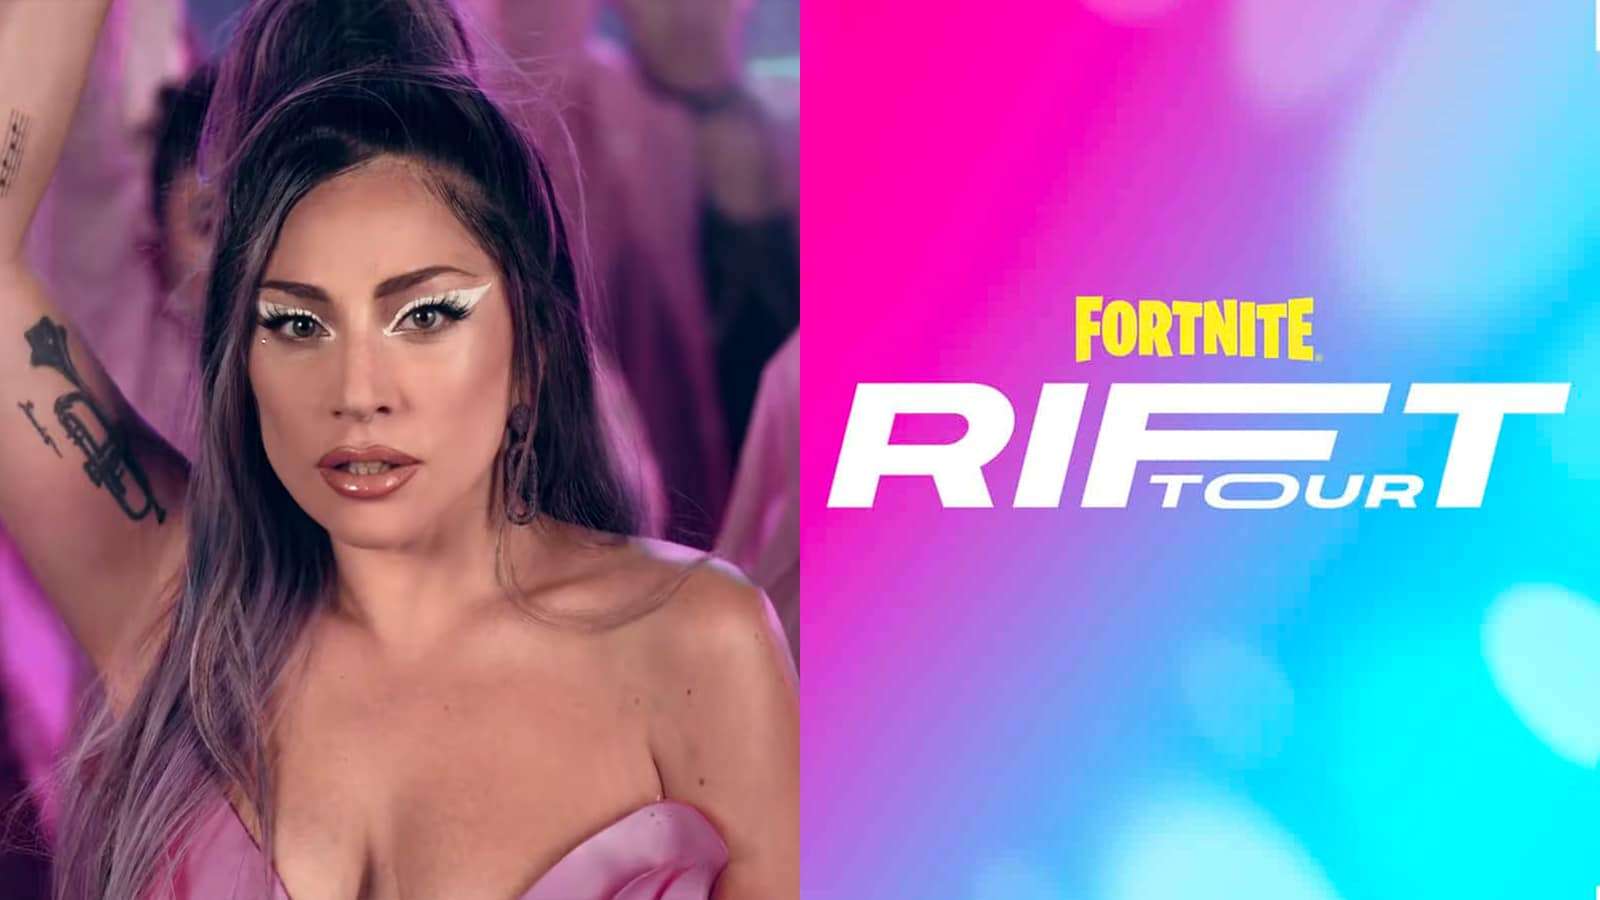 Lady Gaga appearing in the Fortnite rift tour concert